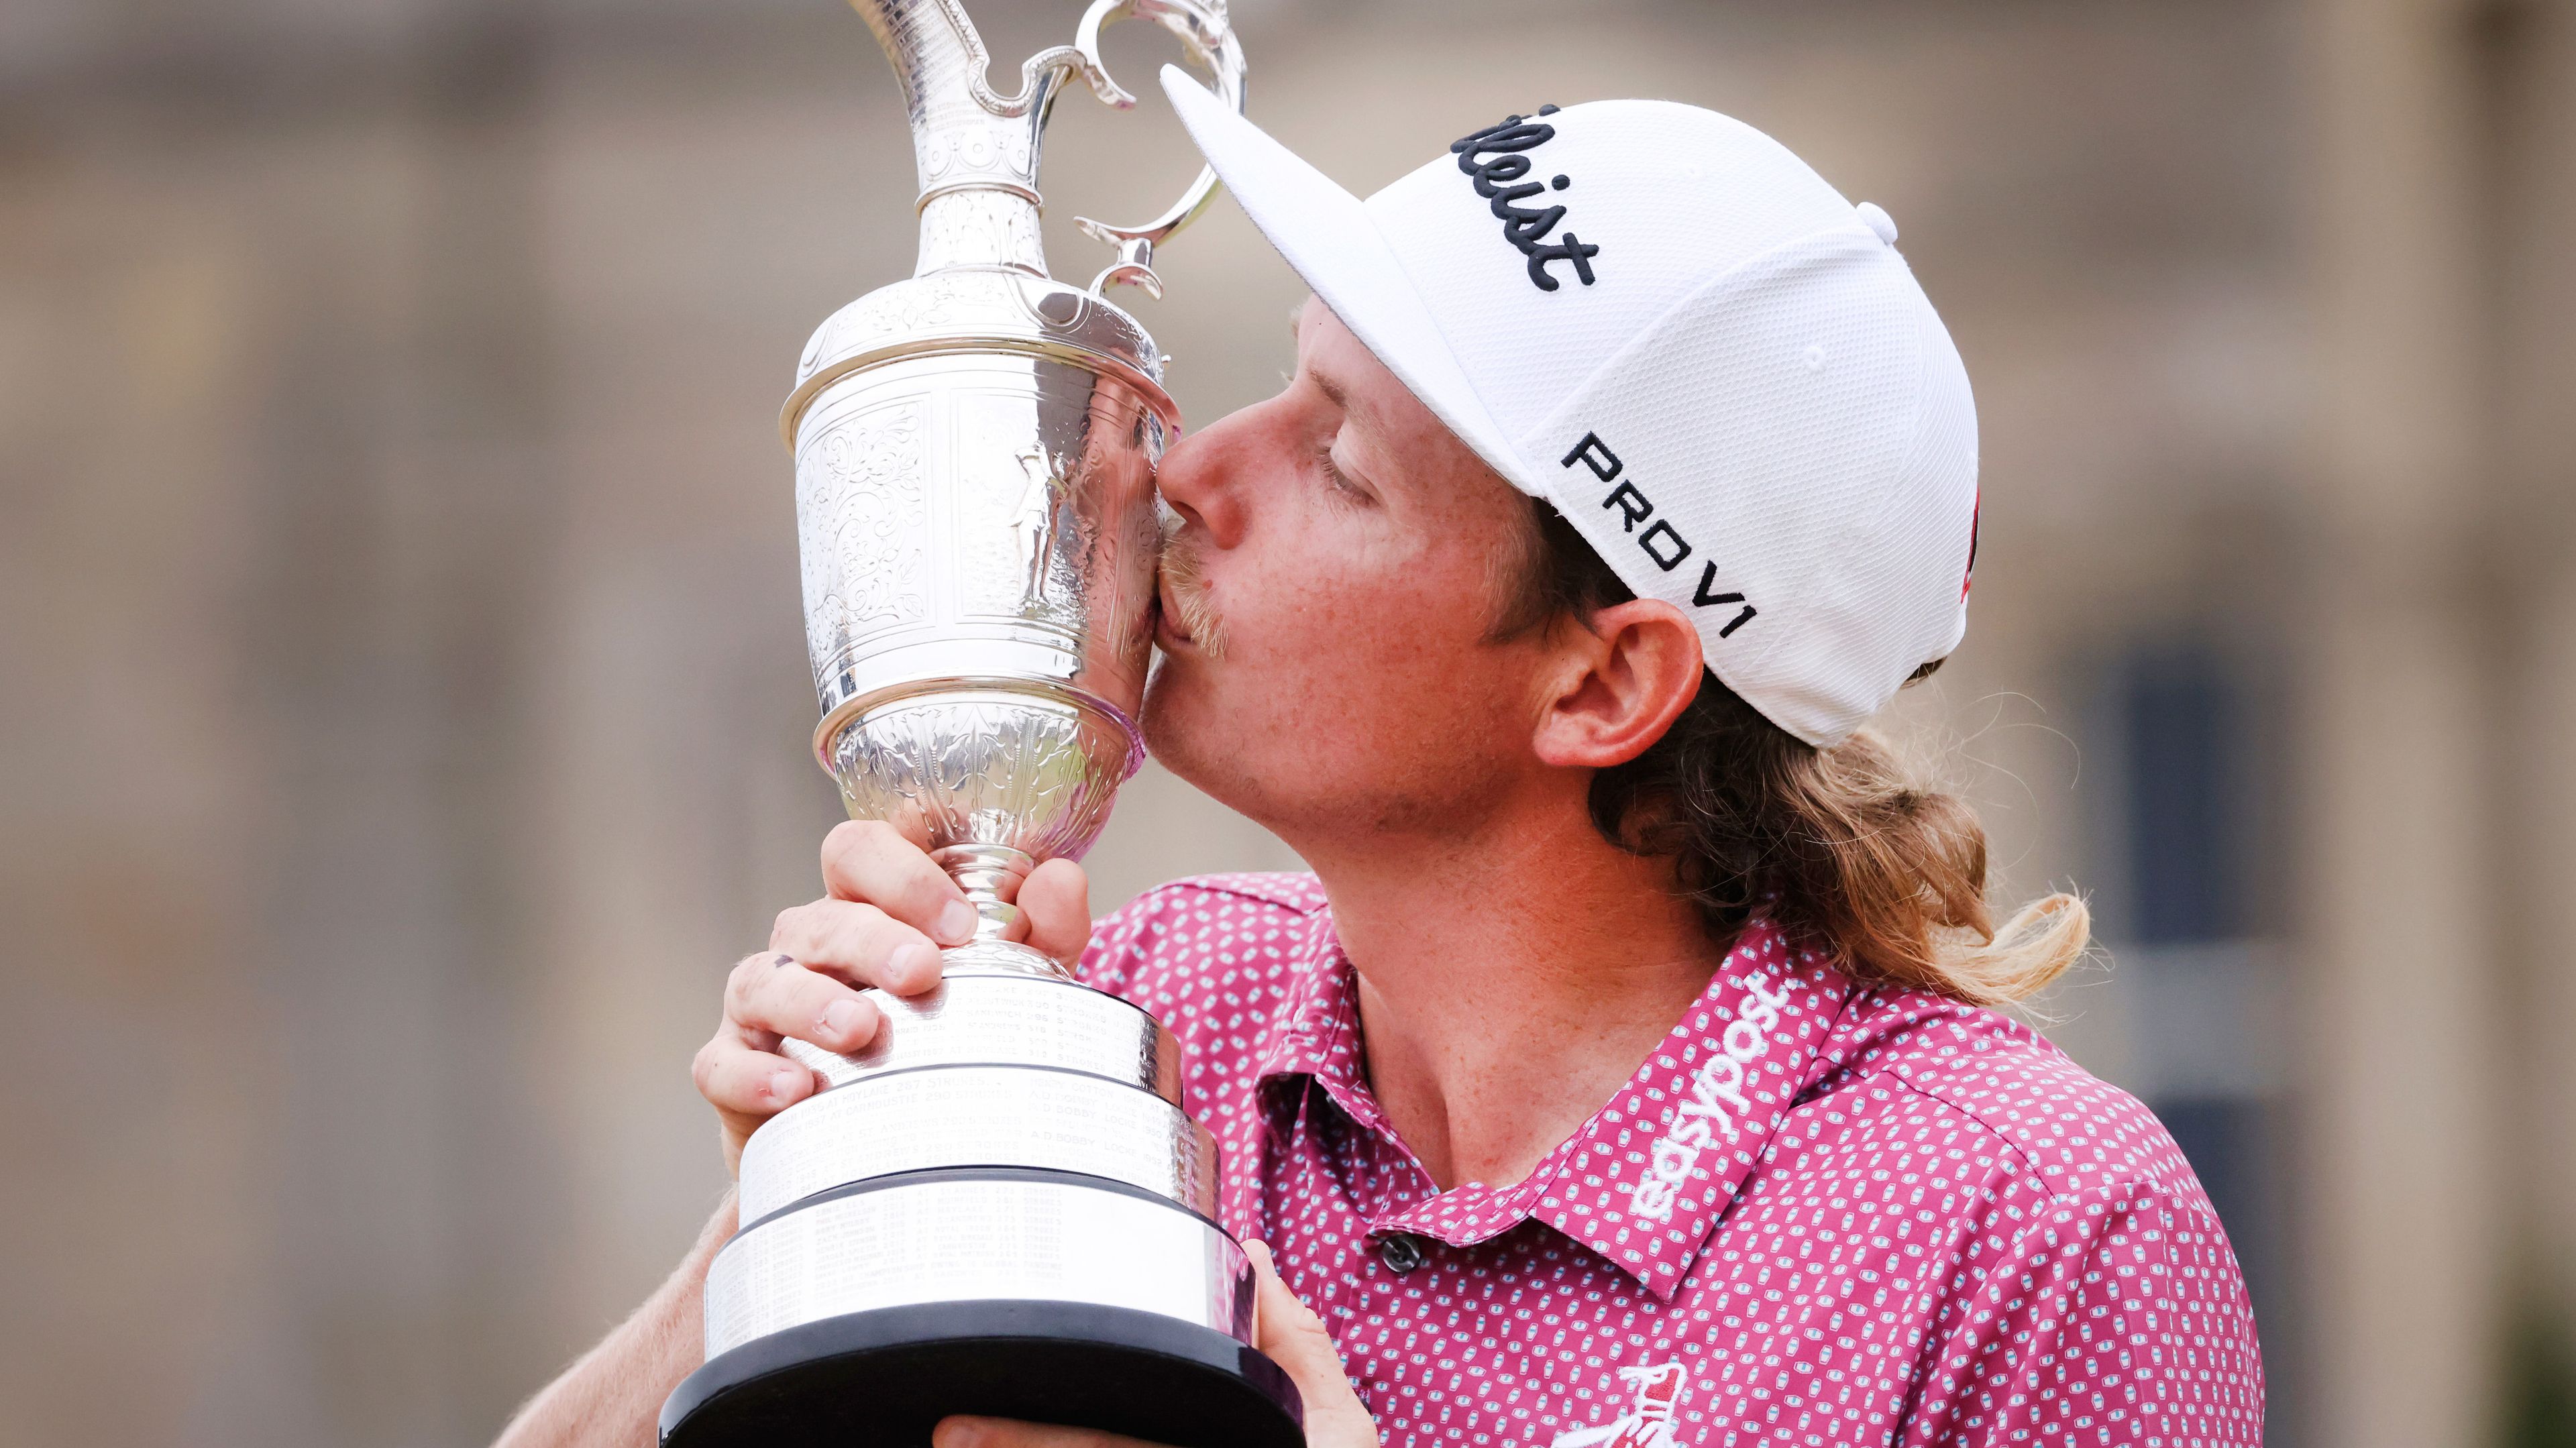 Cameron Smith kisses the claret jug while posing for photographers after winning the British Open golf Championship on the Old Course at St. Andrews, Scotland, Sunday July 17, 2022. (AP Photo/Peter Morrison)